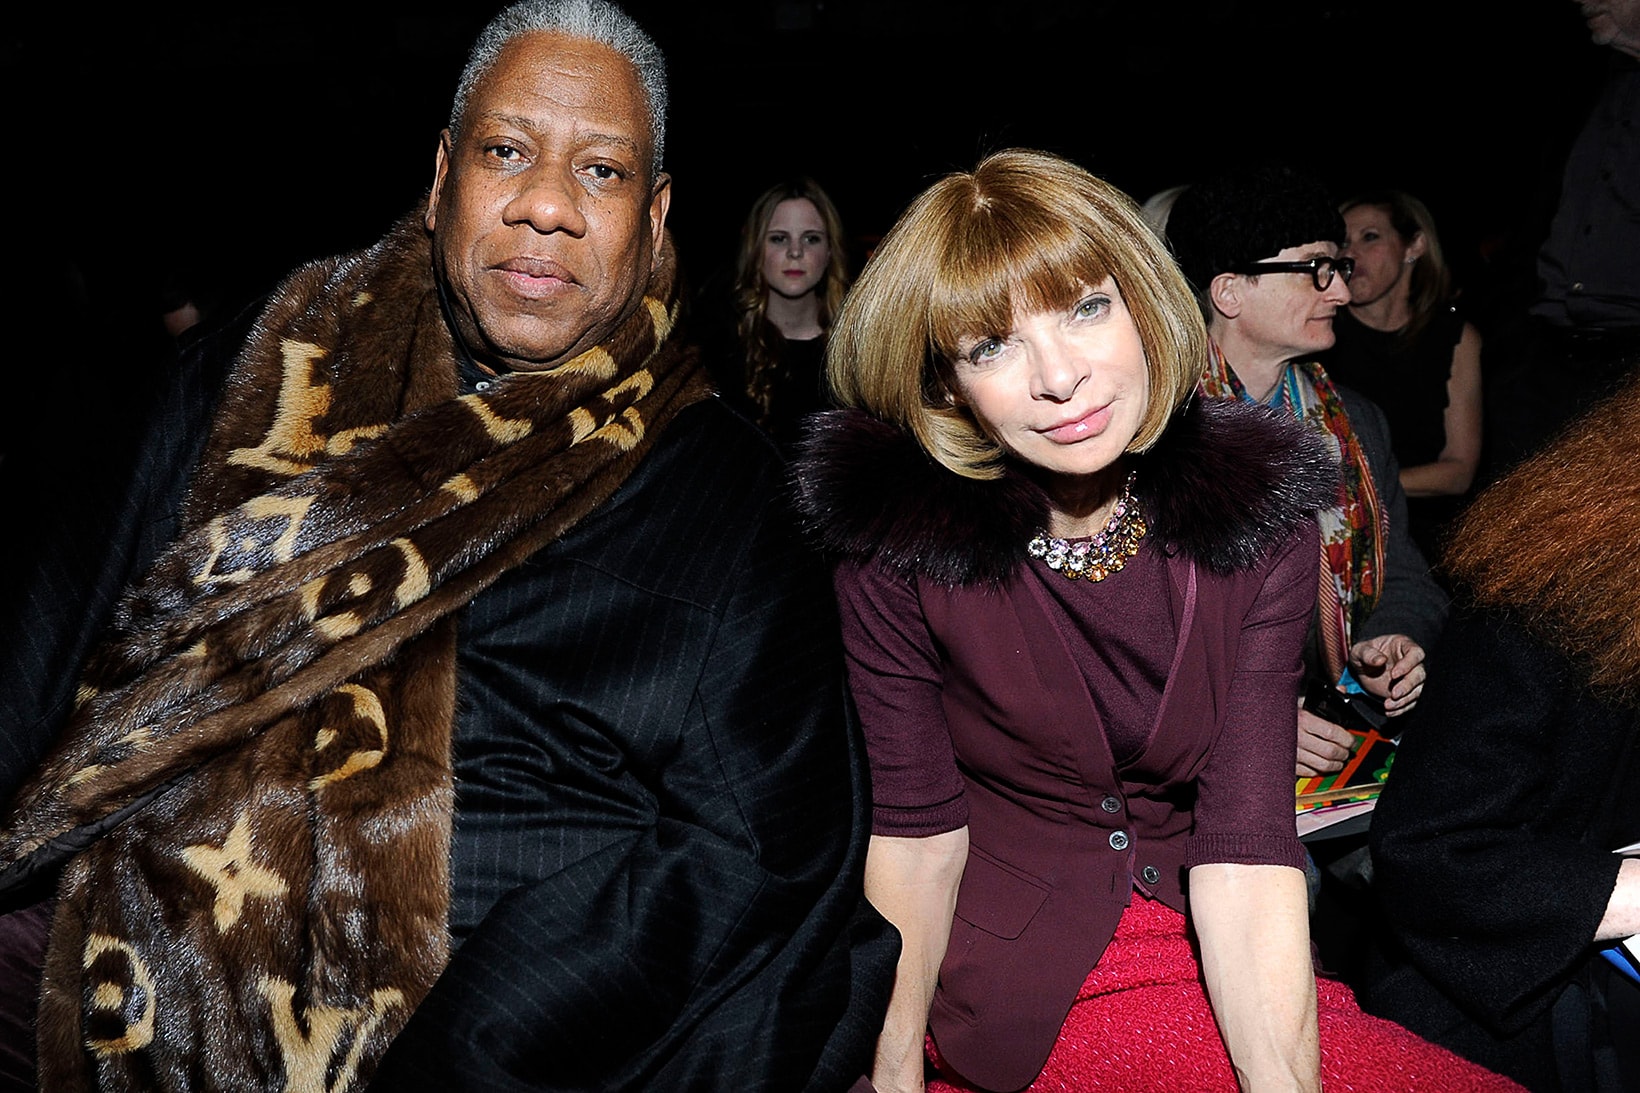 André Leon Talley Anna Wintour The Chiffon Trenches Memoir Friendship 